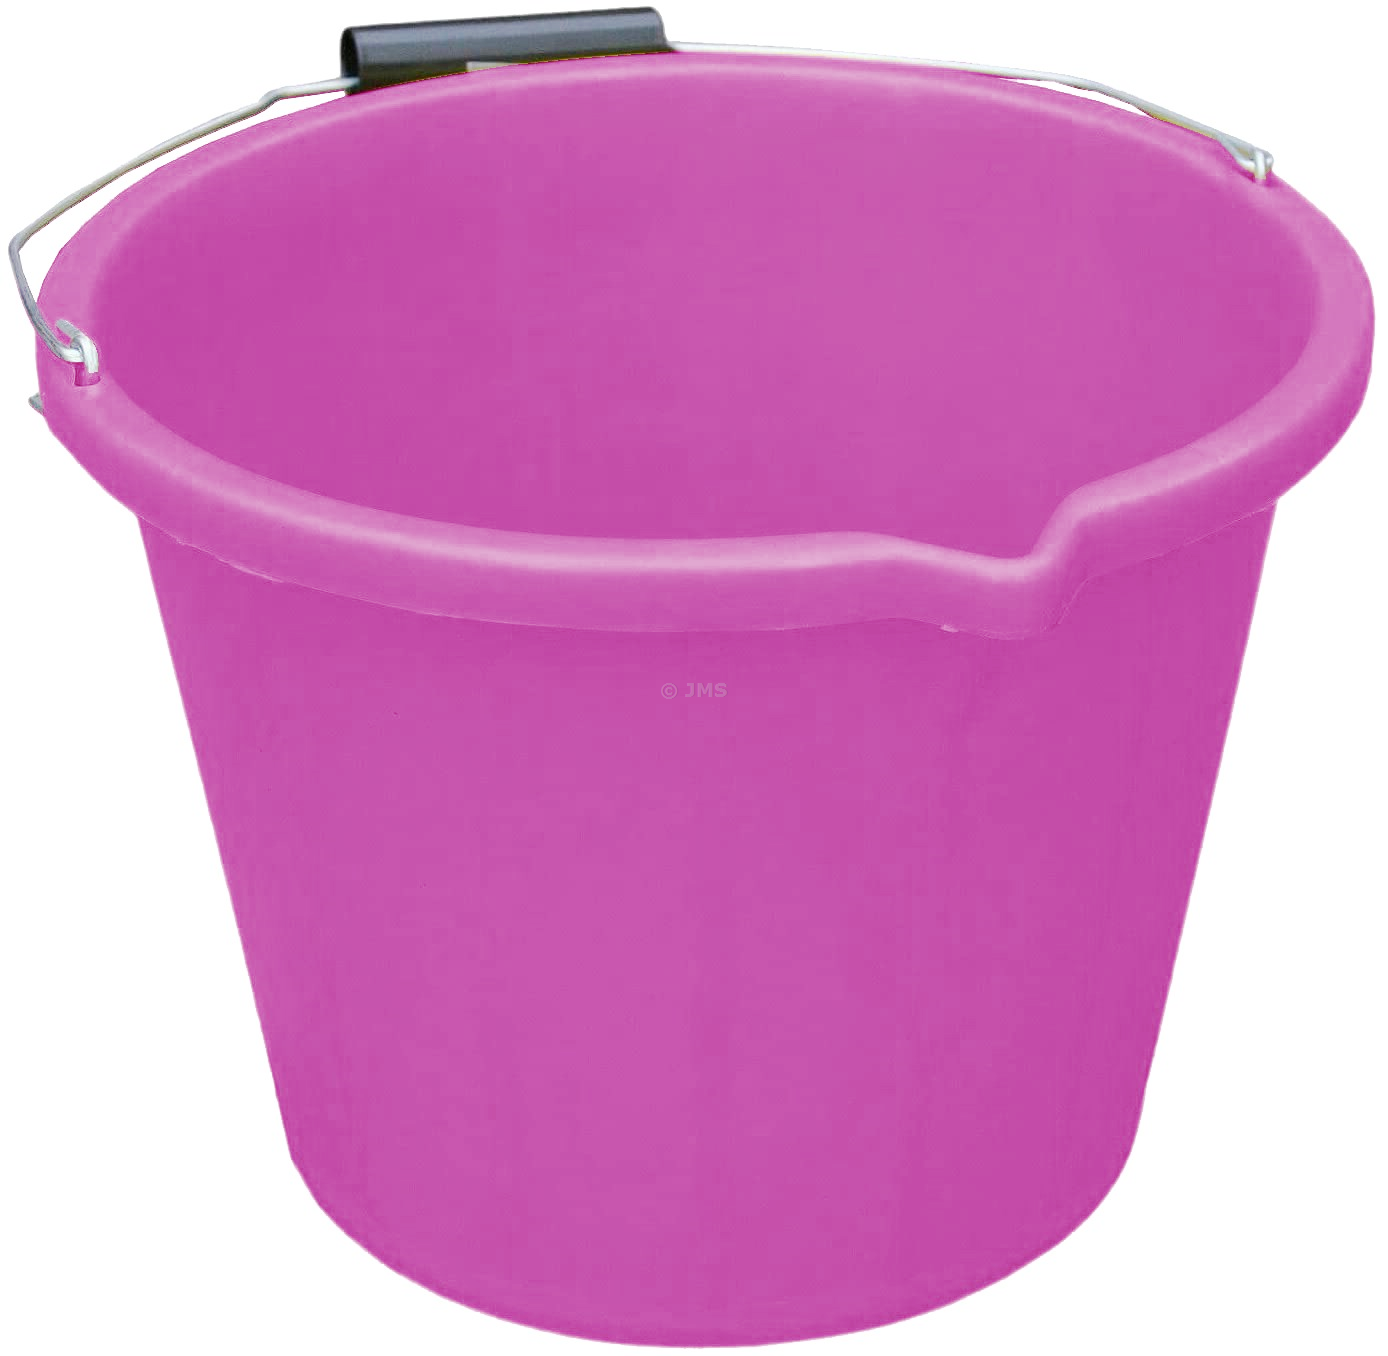 3 Gallon (14L) Plastic Builders Bucket Carry Handle Pouring Lip Water Storage Animal Feed Home Garden - Pink